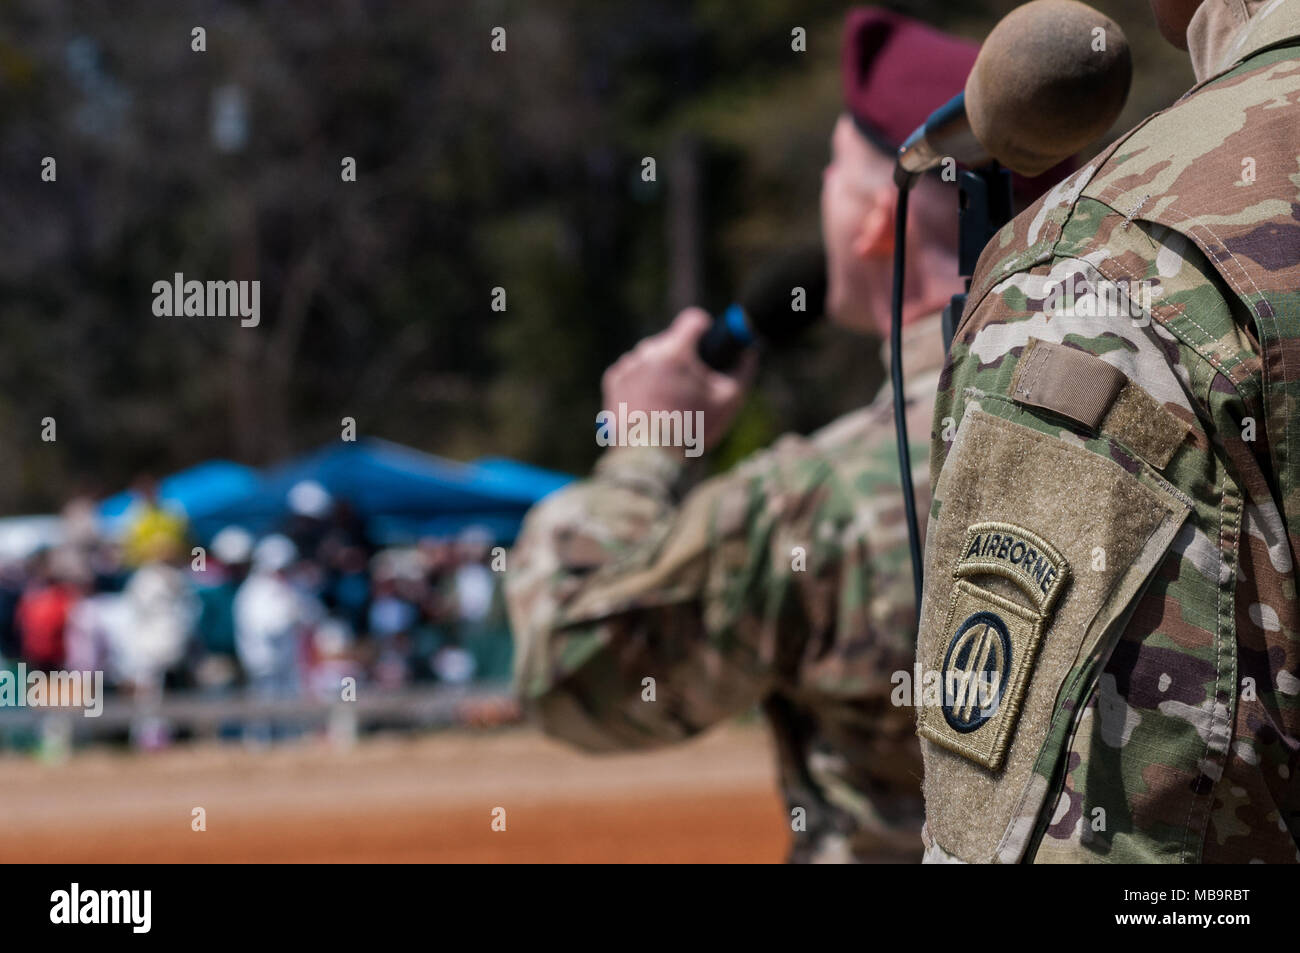 Pinehurst, North Carolina, USA. 8th Apr, 2018. April 8, 2018 - Pinehurst, N.C., USA - The 82nd Airborne Division All American Chorus performs during the opening ceremony at the 69th annual Spring Matinee Harness races sponsored by the Pinehurst Driving & Training Club, at the Pinehurst Harness Track, Pinehurst, N.C. The Pinehurst Harness Track is a 111-acre equestrian facility that has been a winter training center for standardbred horses since 1915. This year's races commemorate the 103rd anniversary of the track. Credit: Timothy L. Hale/ZUMA Wire/Alamy Live News Stock Photo